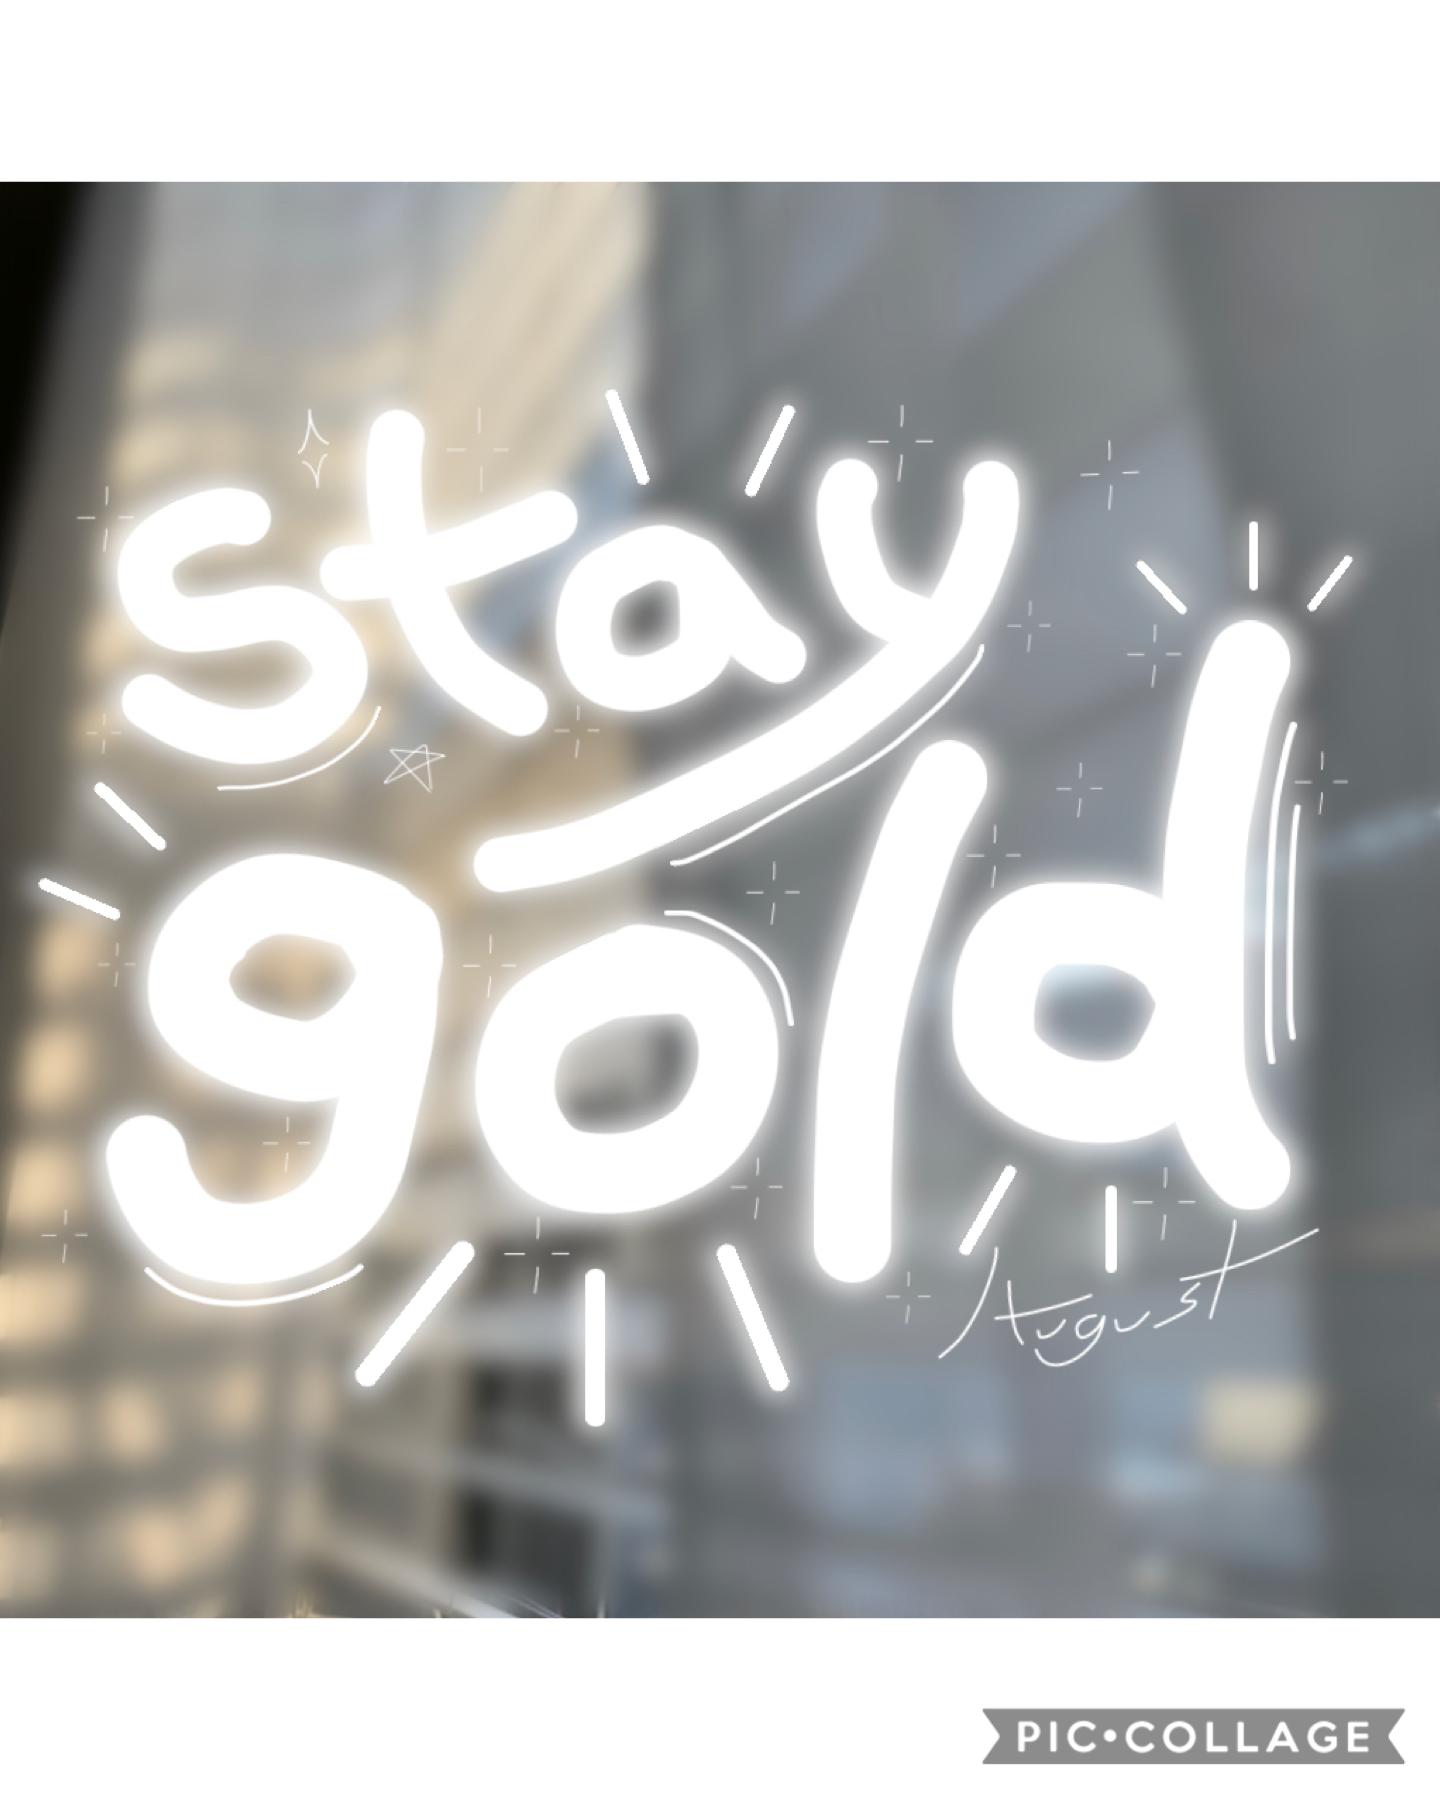 ||💫|| STAY GOLD - BTS ||💫|| 

posting bc it’s been a while ; this song came out a while ago but i wanted to try this style ; listen to ‘your eyes tell’ by bts & i’ll give you a virtual hug ; jk you all get hugs...but do listen pls👉👈 ; ilyasm — august